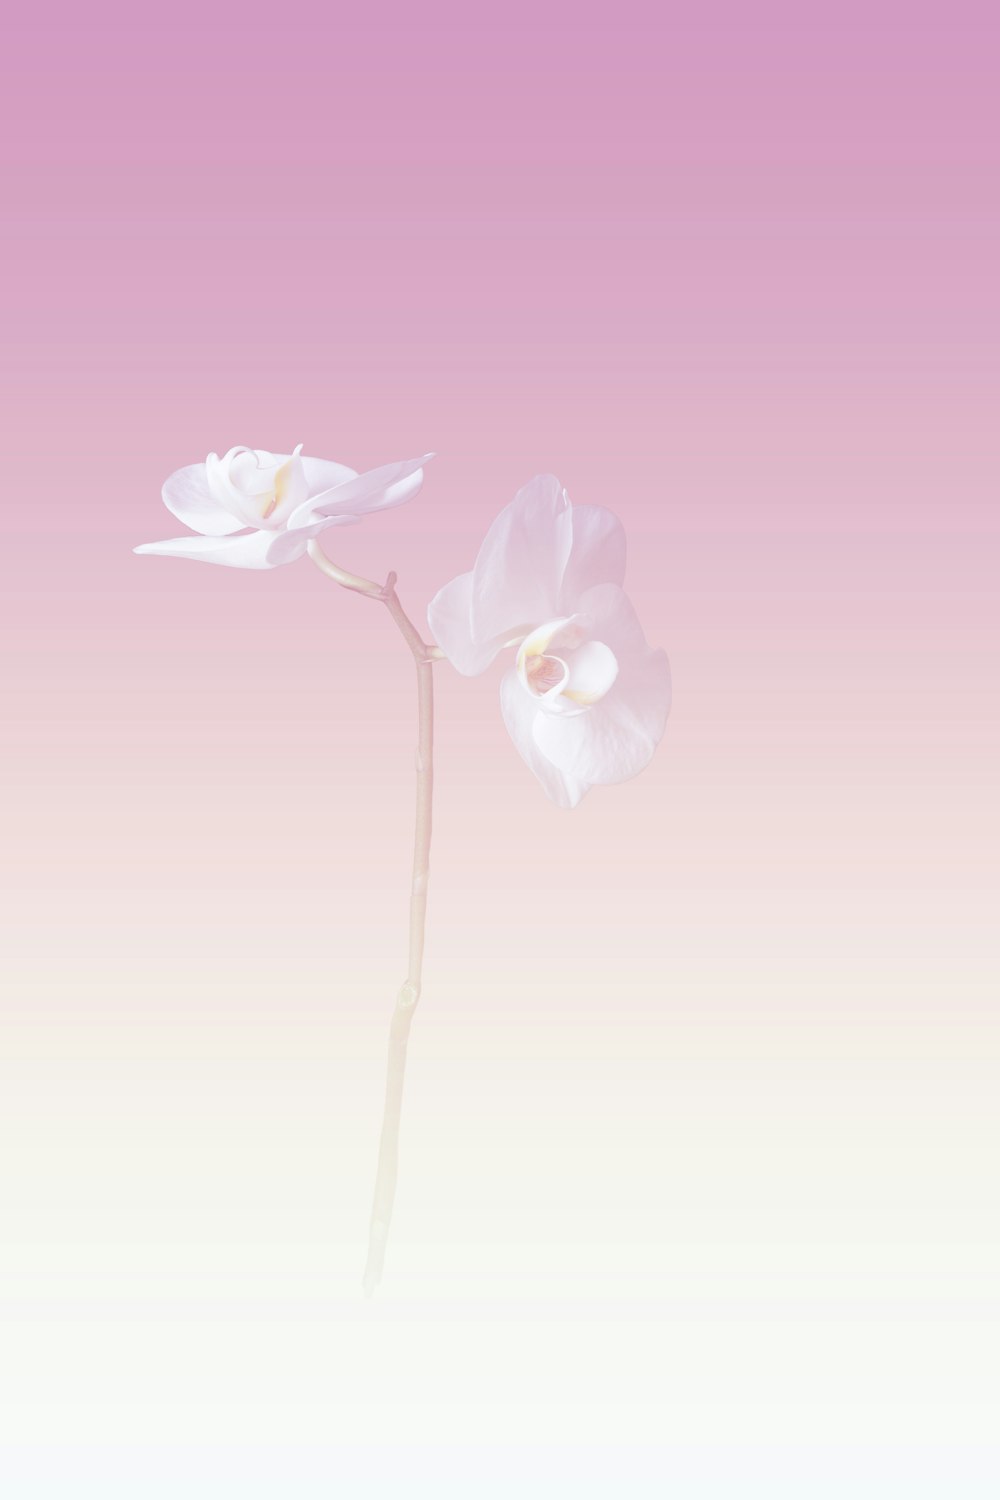 two white flowers on a pink and white background